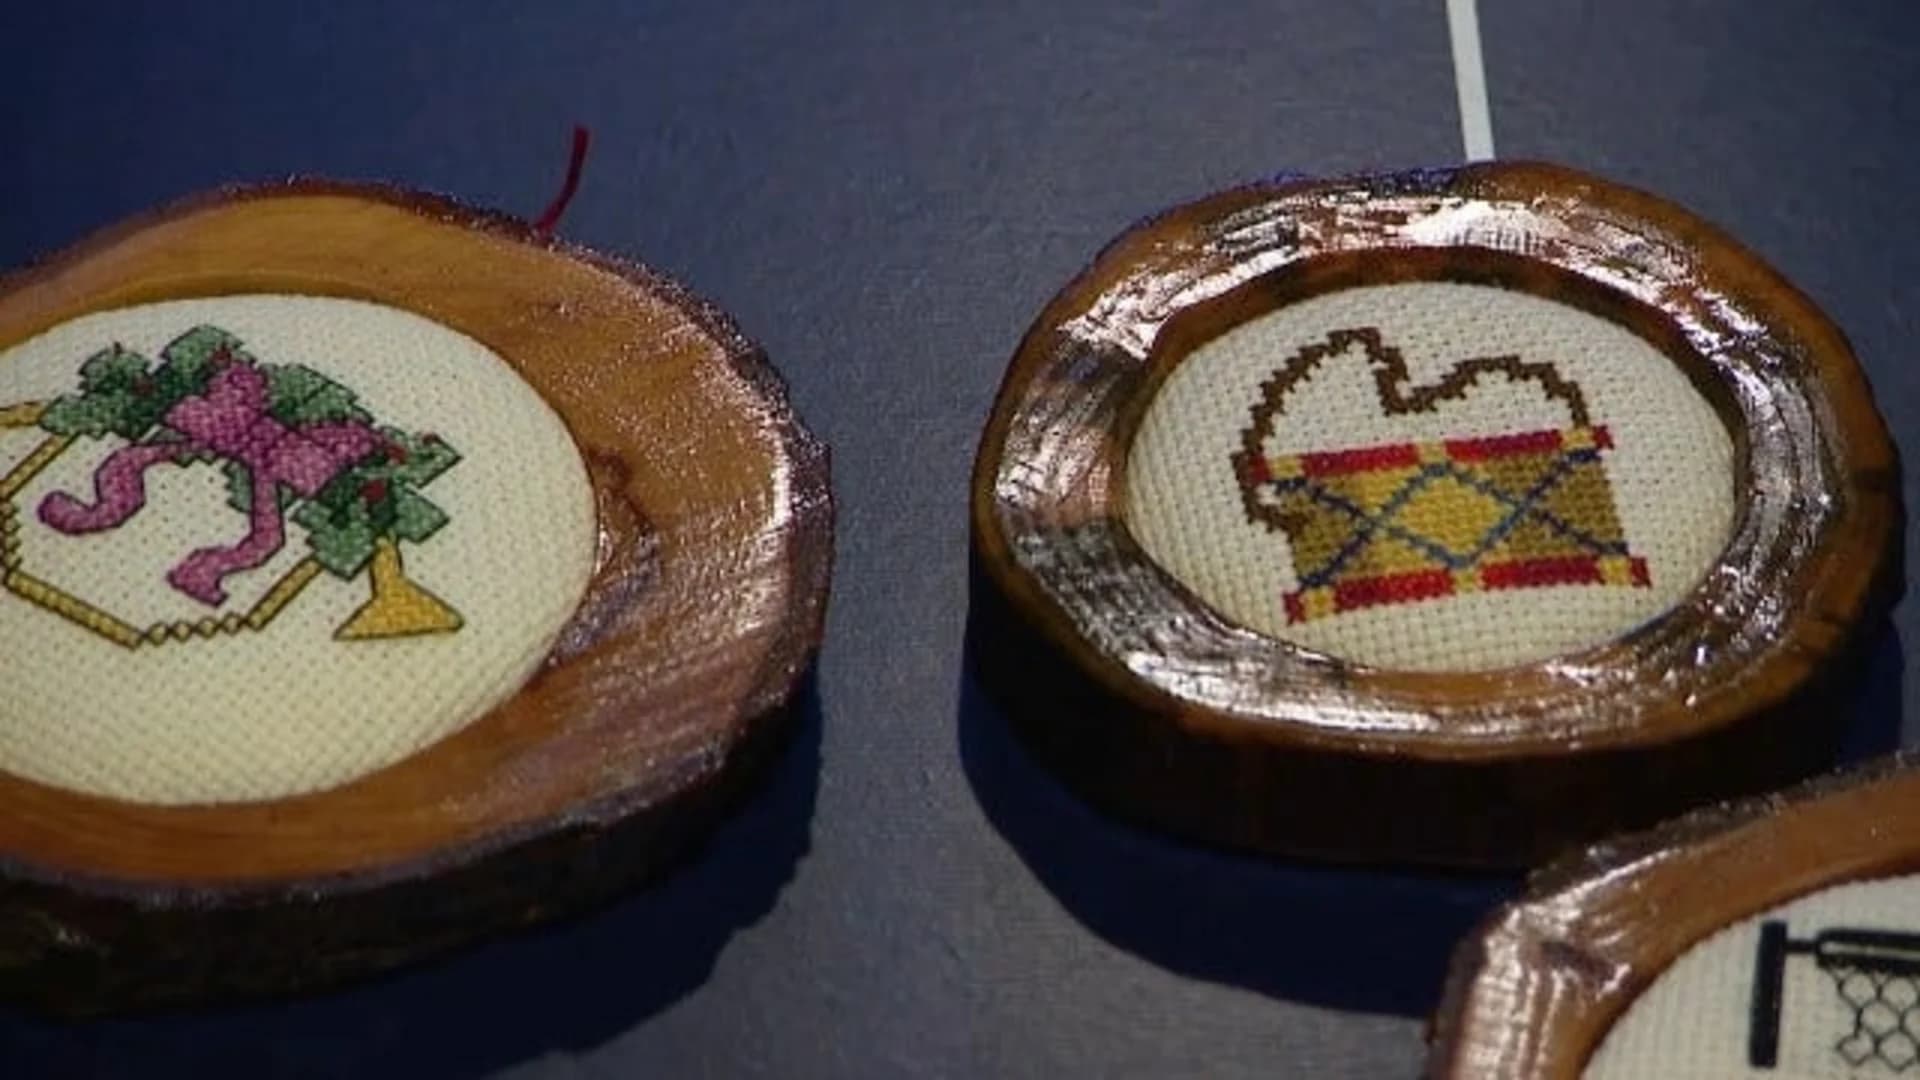 East End: Ornament maker drops cigarettes for cross-stitching